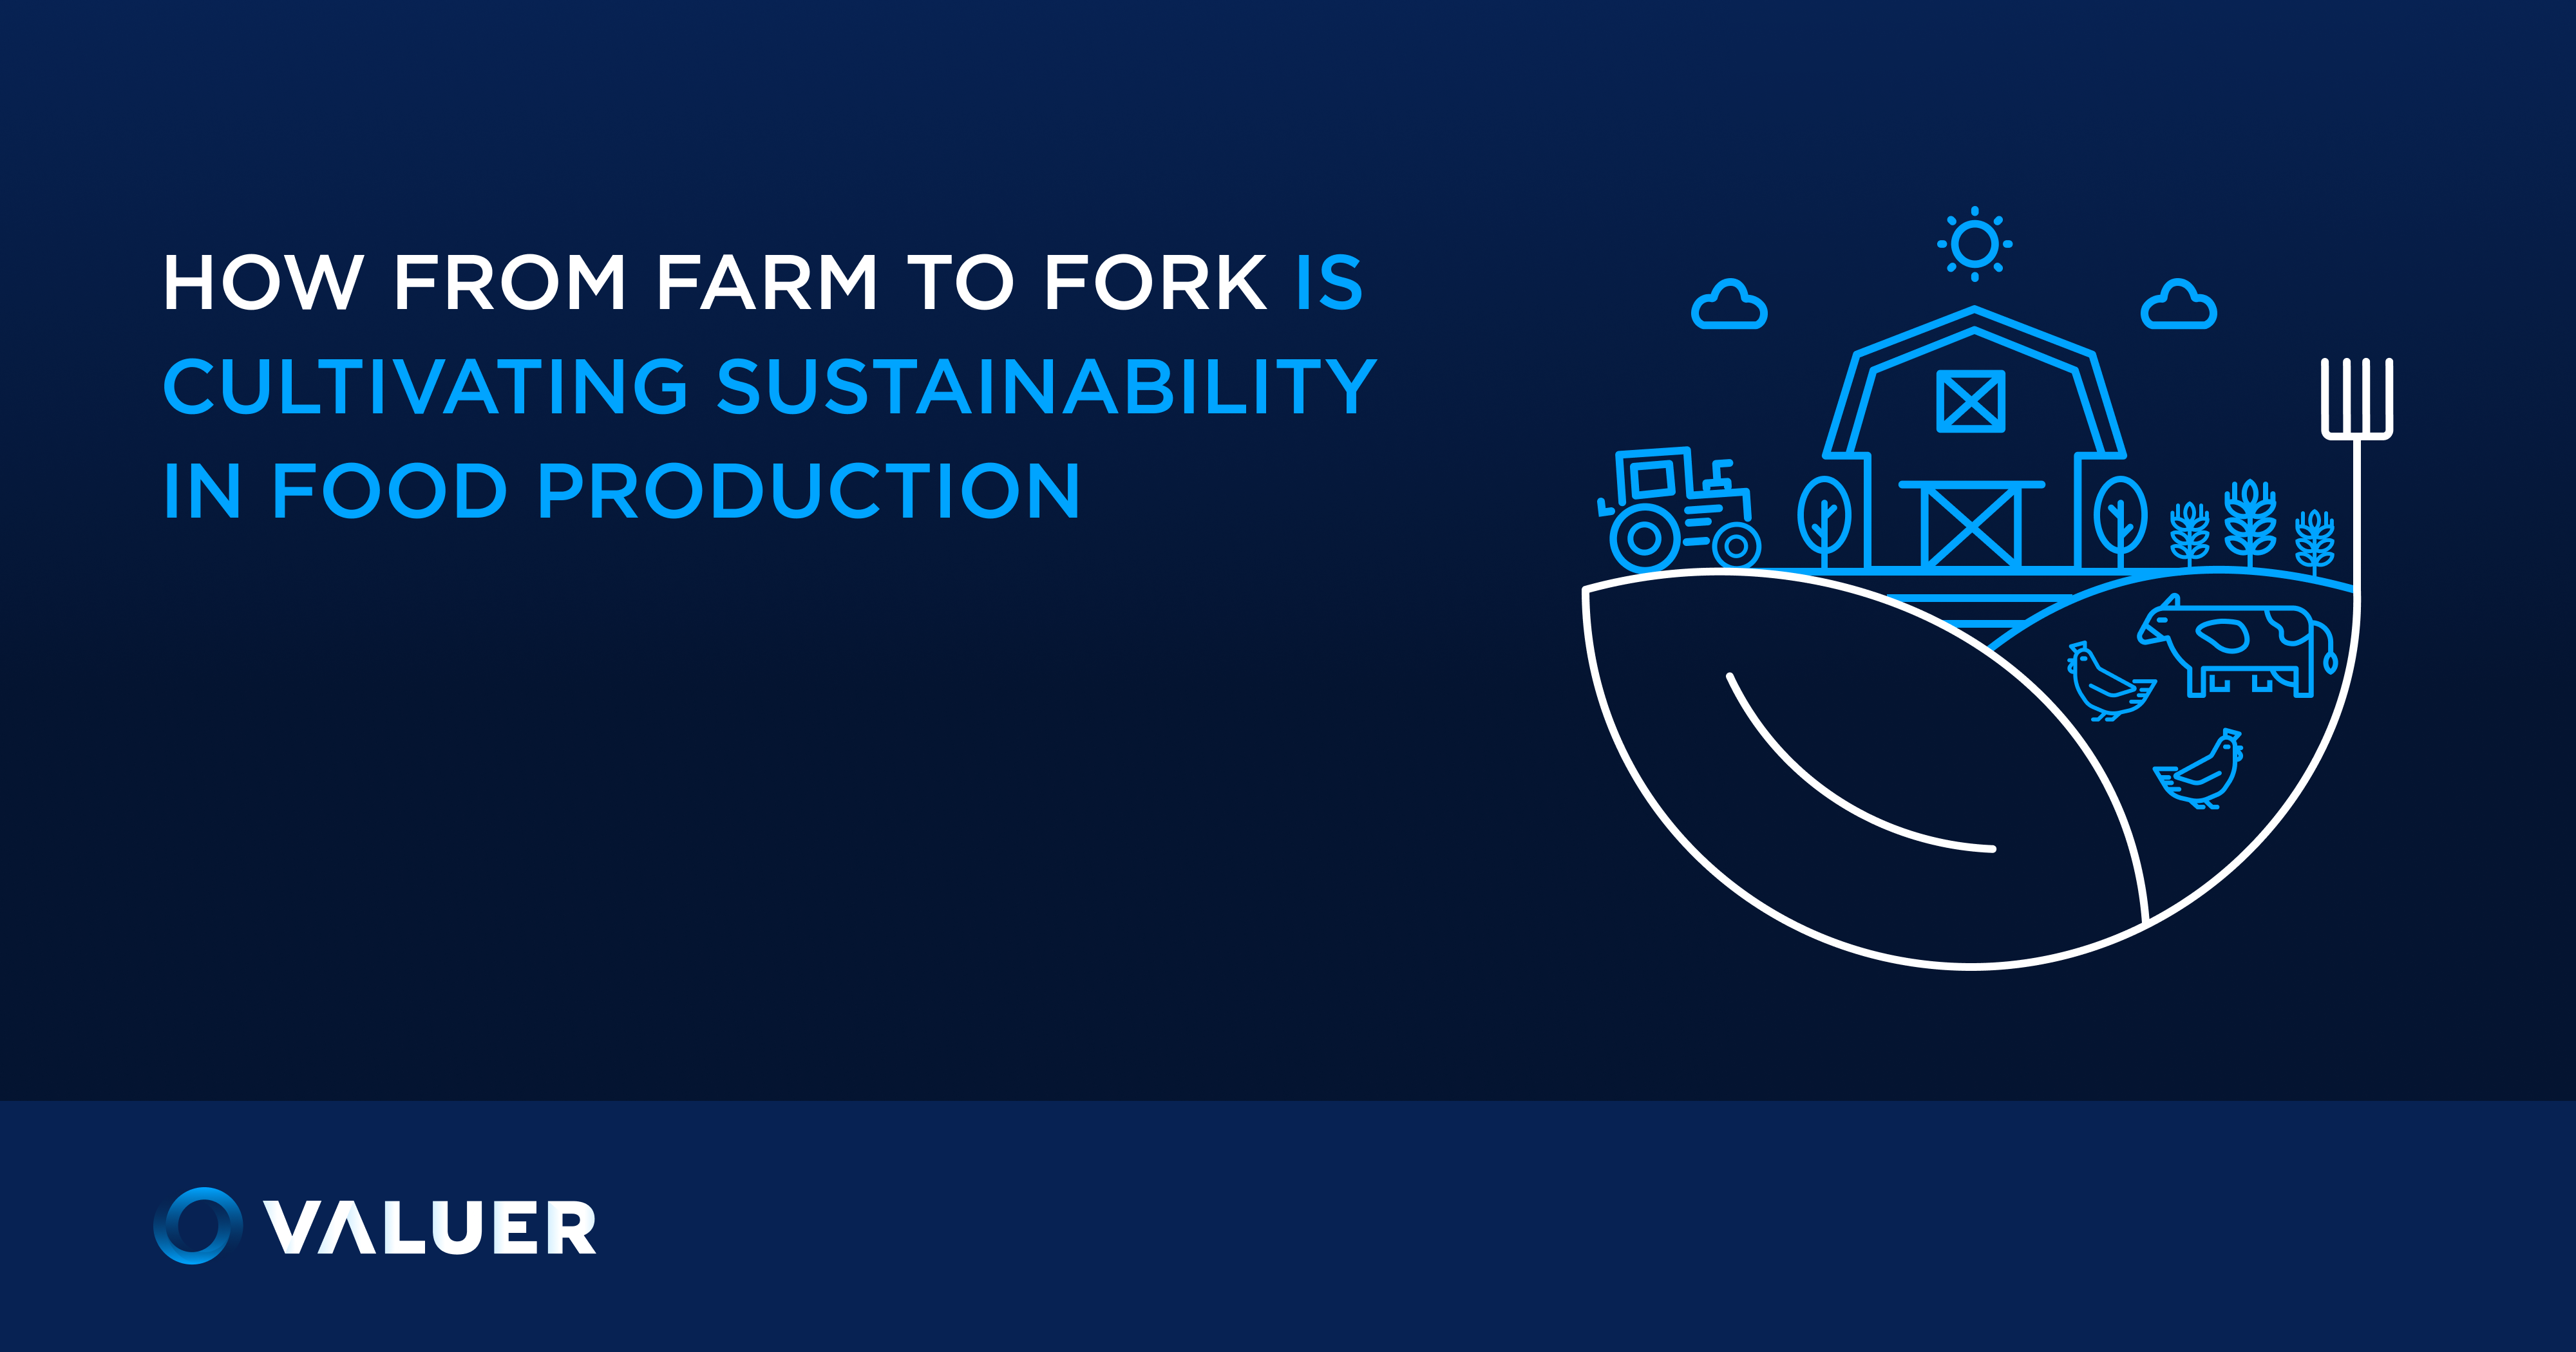 Farm to Fork Solutions: Sustainability in Food Production (free report)